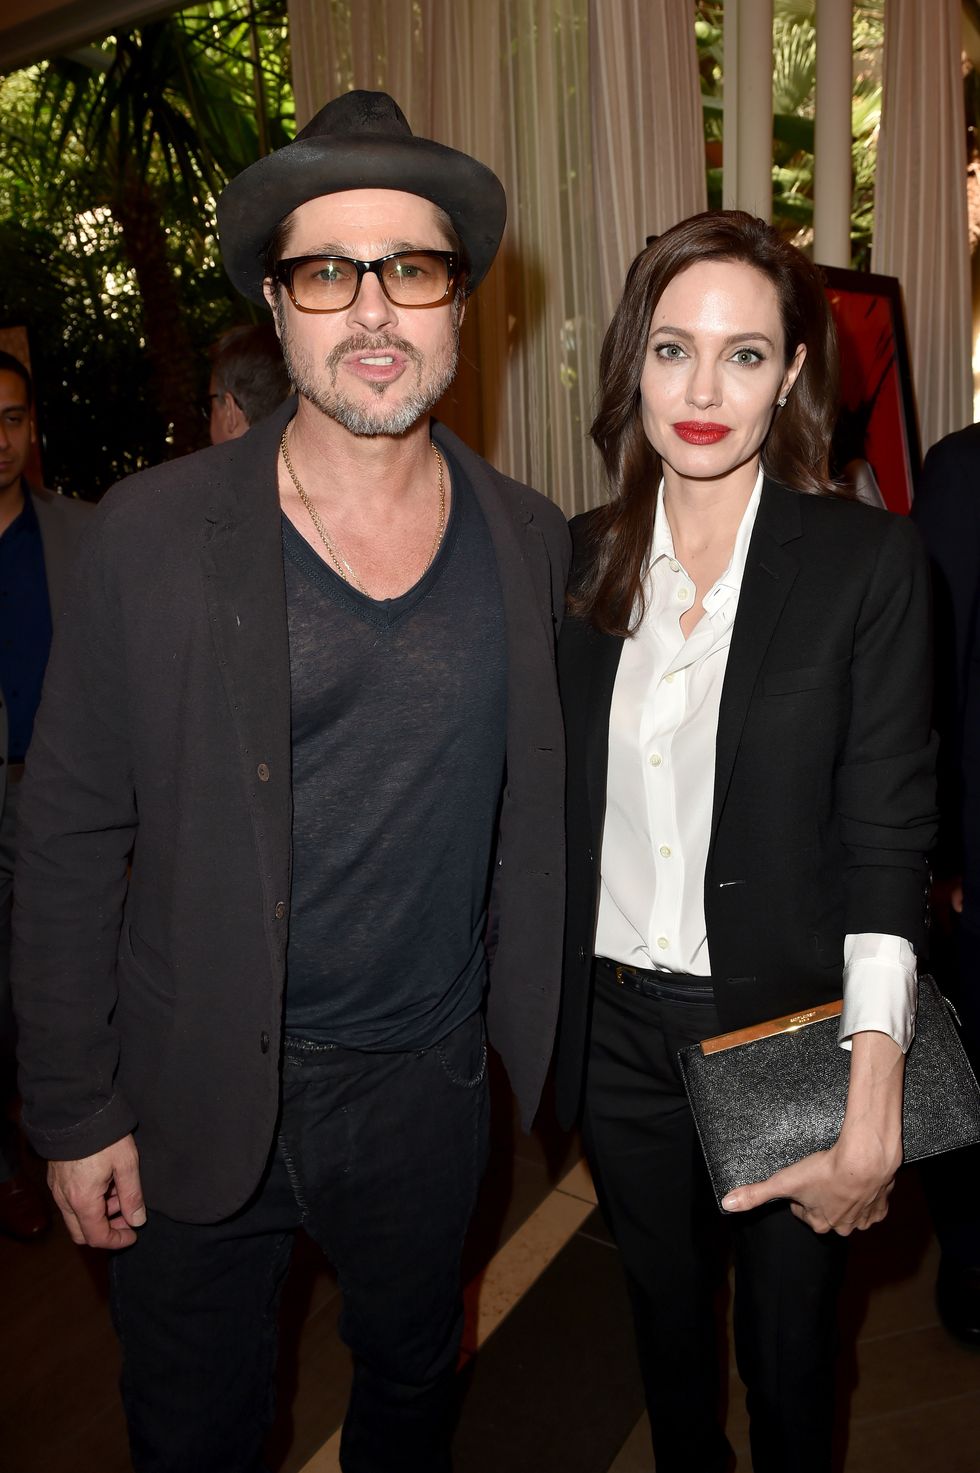 BEVERLY HILLS, CA - JANUARY 09: Actor Brad Pitt (L) and actress/director Angelina Jolie attend the 15th Annual AFI Awards at Four Seasons Hotel Los Angeles at Beverly Hills on January 9, 2015 in Beverly Hills, California. (Photo by Kevin Winter/Getty Images for AFI)